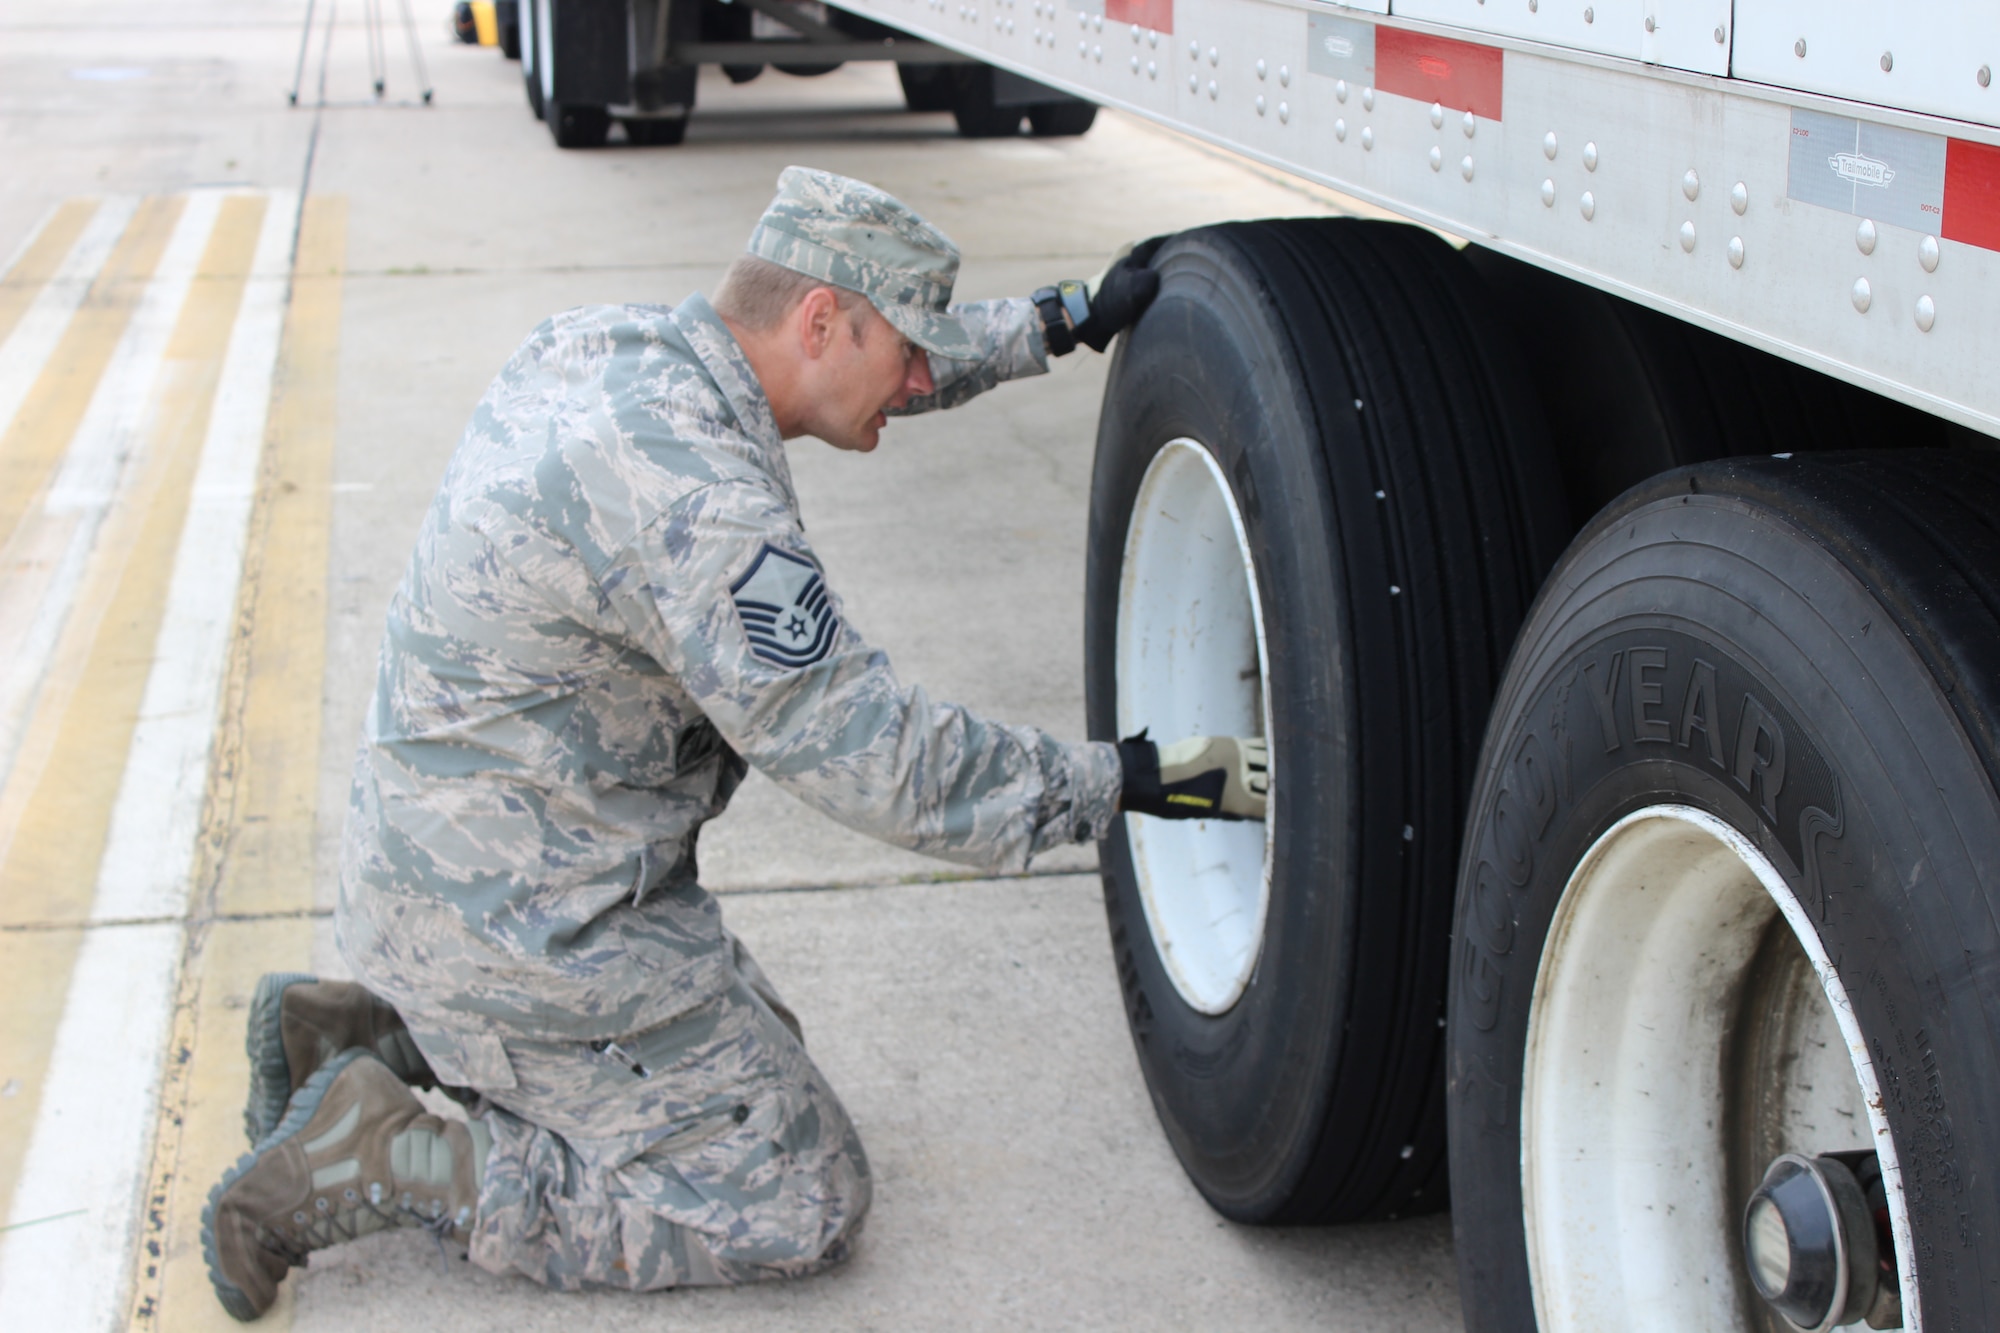 Master Sgt. Michael Mabe goes through a pre-trip inspection on his tractor trailer at Dobbins Air Reserve Base, Ga. Mabe was a student in the tractor trailer training class at the Expeditionary Combat Support-Training Certification Center at Dobbins. The classes are conducted on a “dead runway” on base which is used for a multitude of various training courses. (U.S. Air Force Photo/Released)